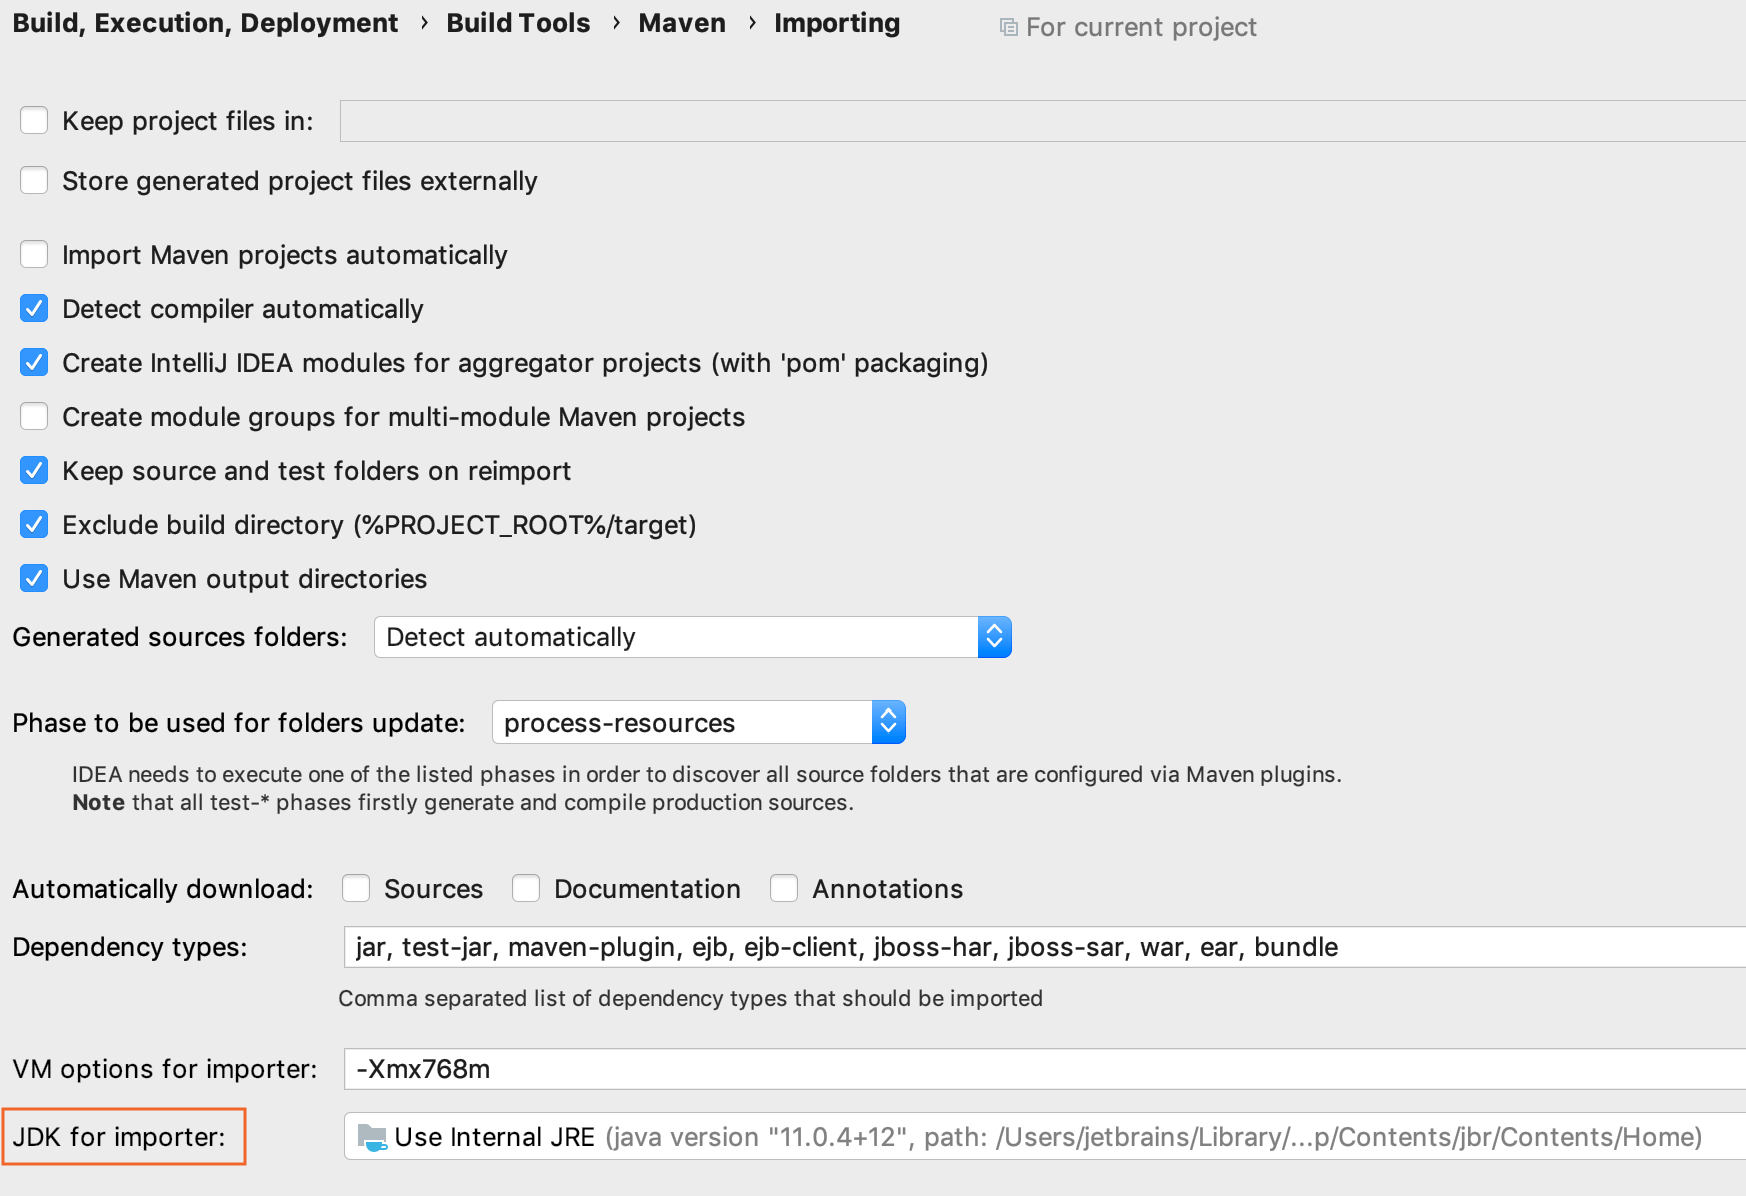 Maven Settings / Importing page